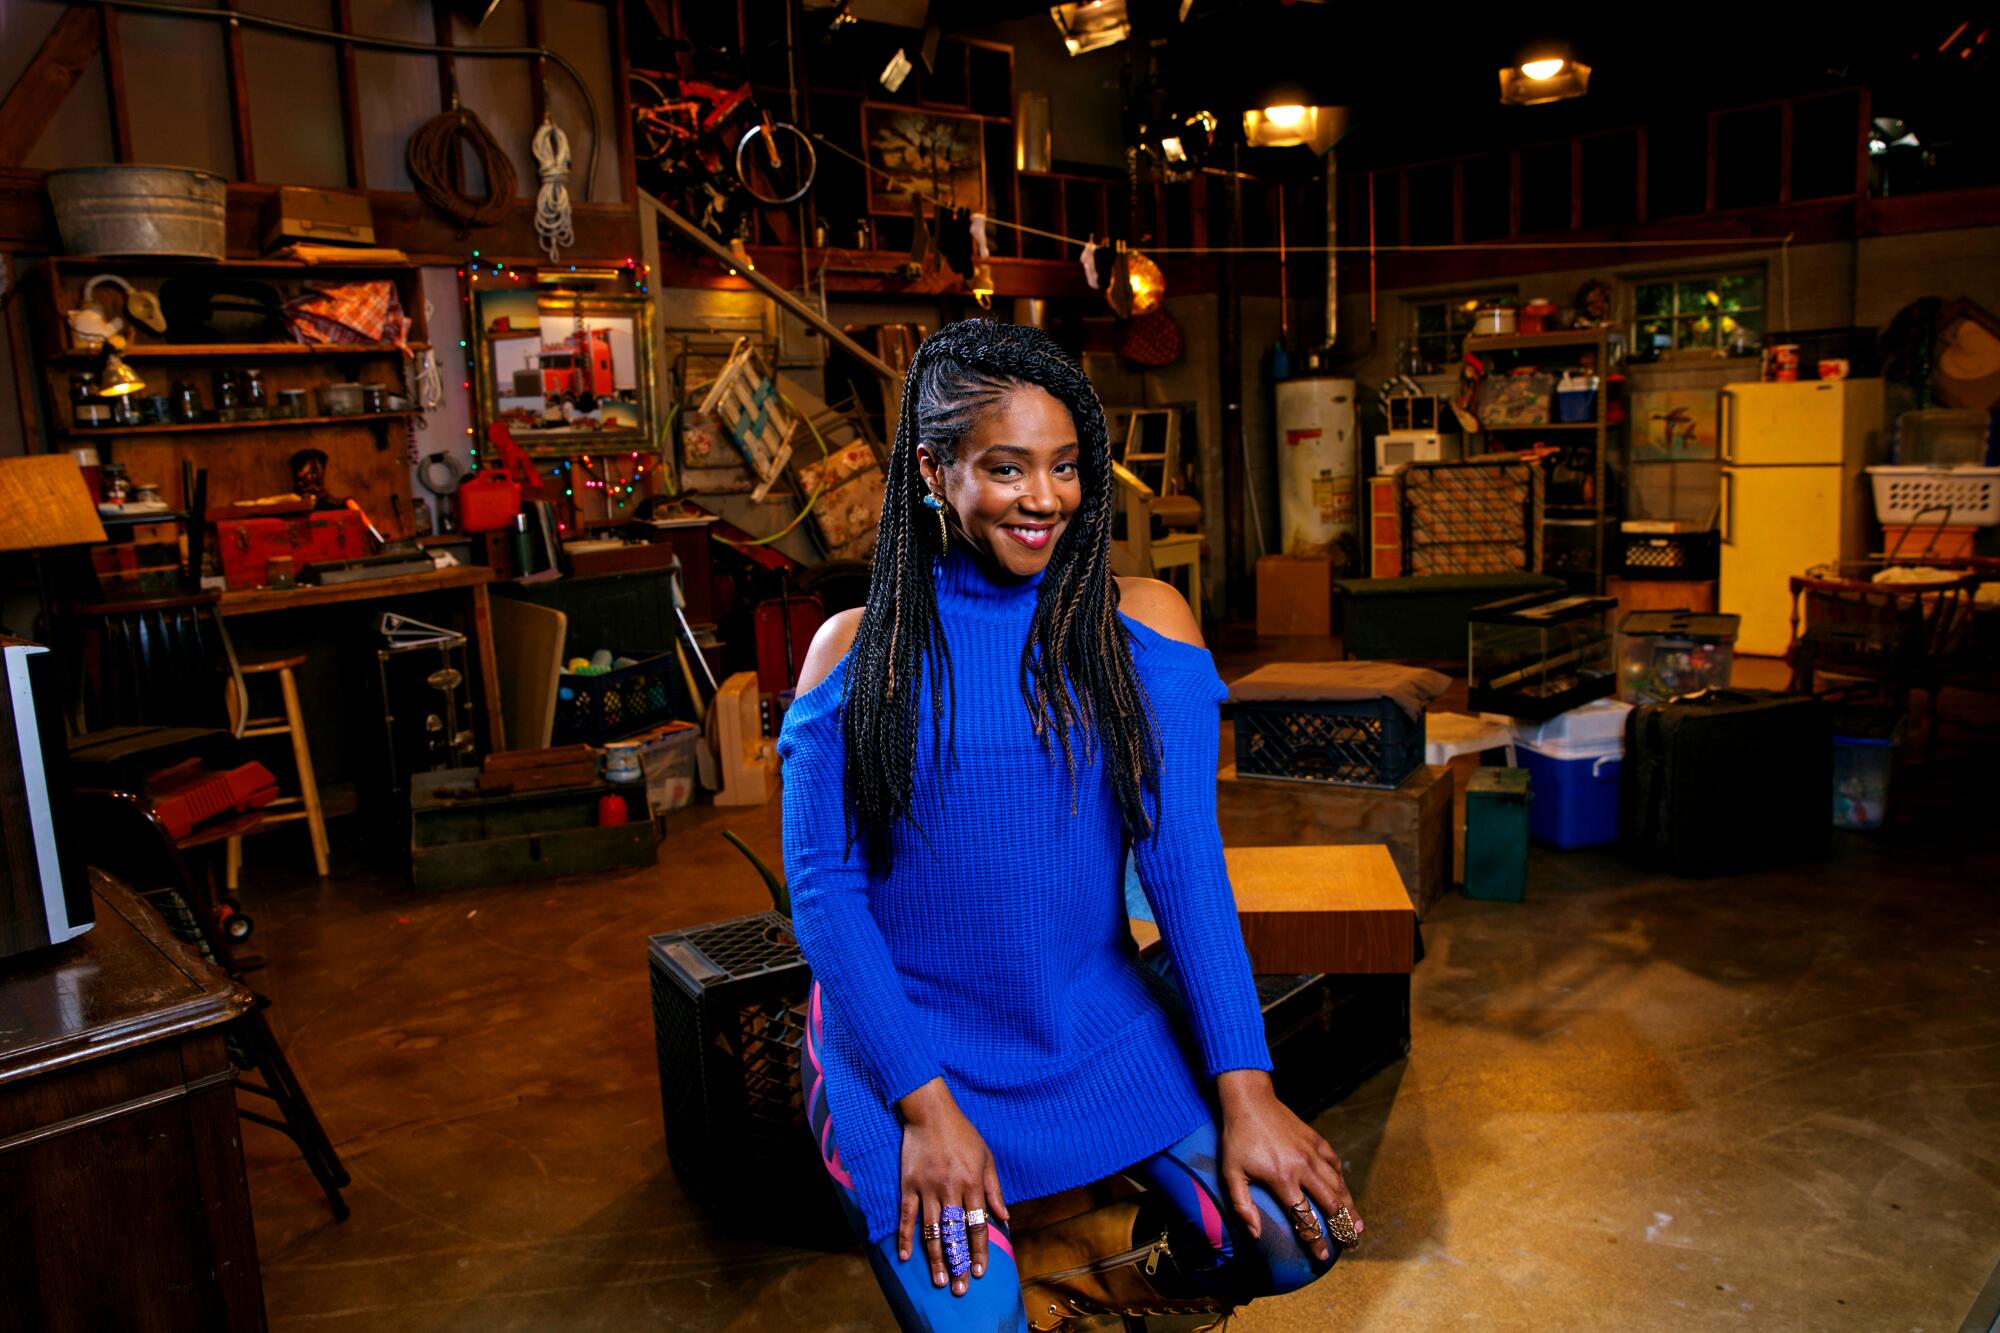 Actress Tiffany Haddish in a blue top with shoulder cutouts, on a TV set.